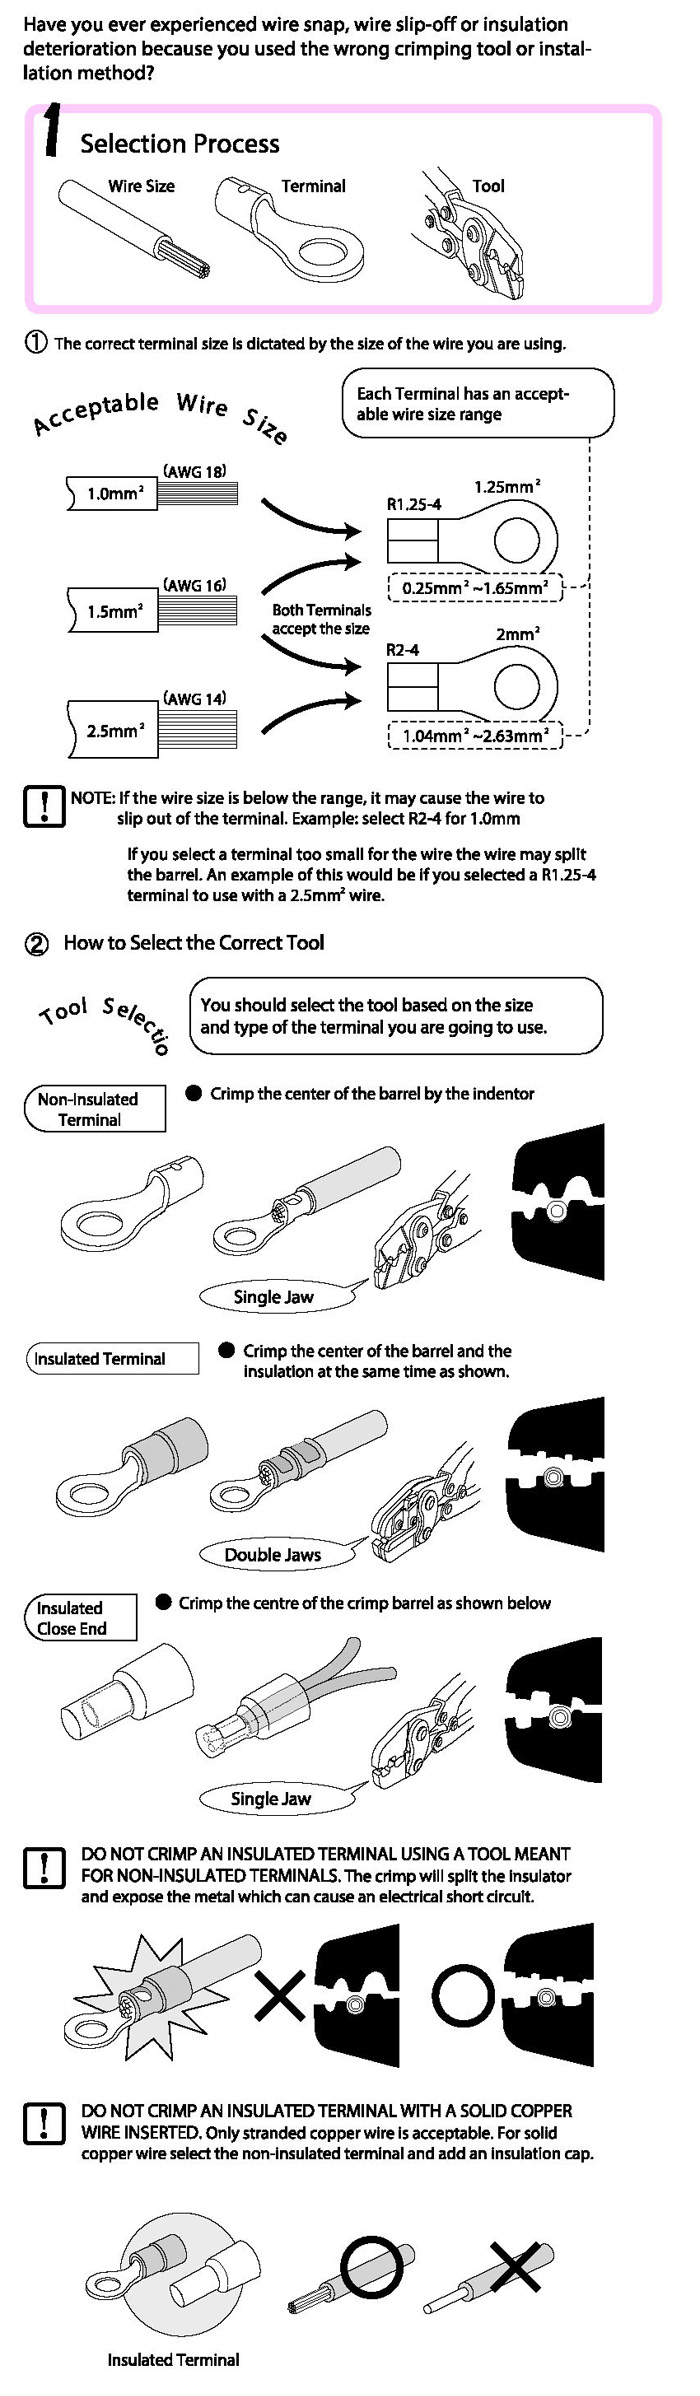 Basic Guide to Terminal Crimping 1. How to Select a Terminal